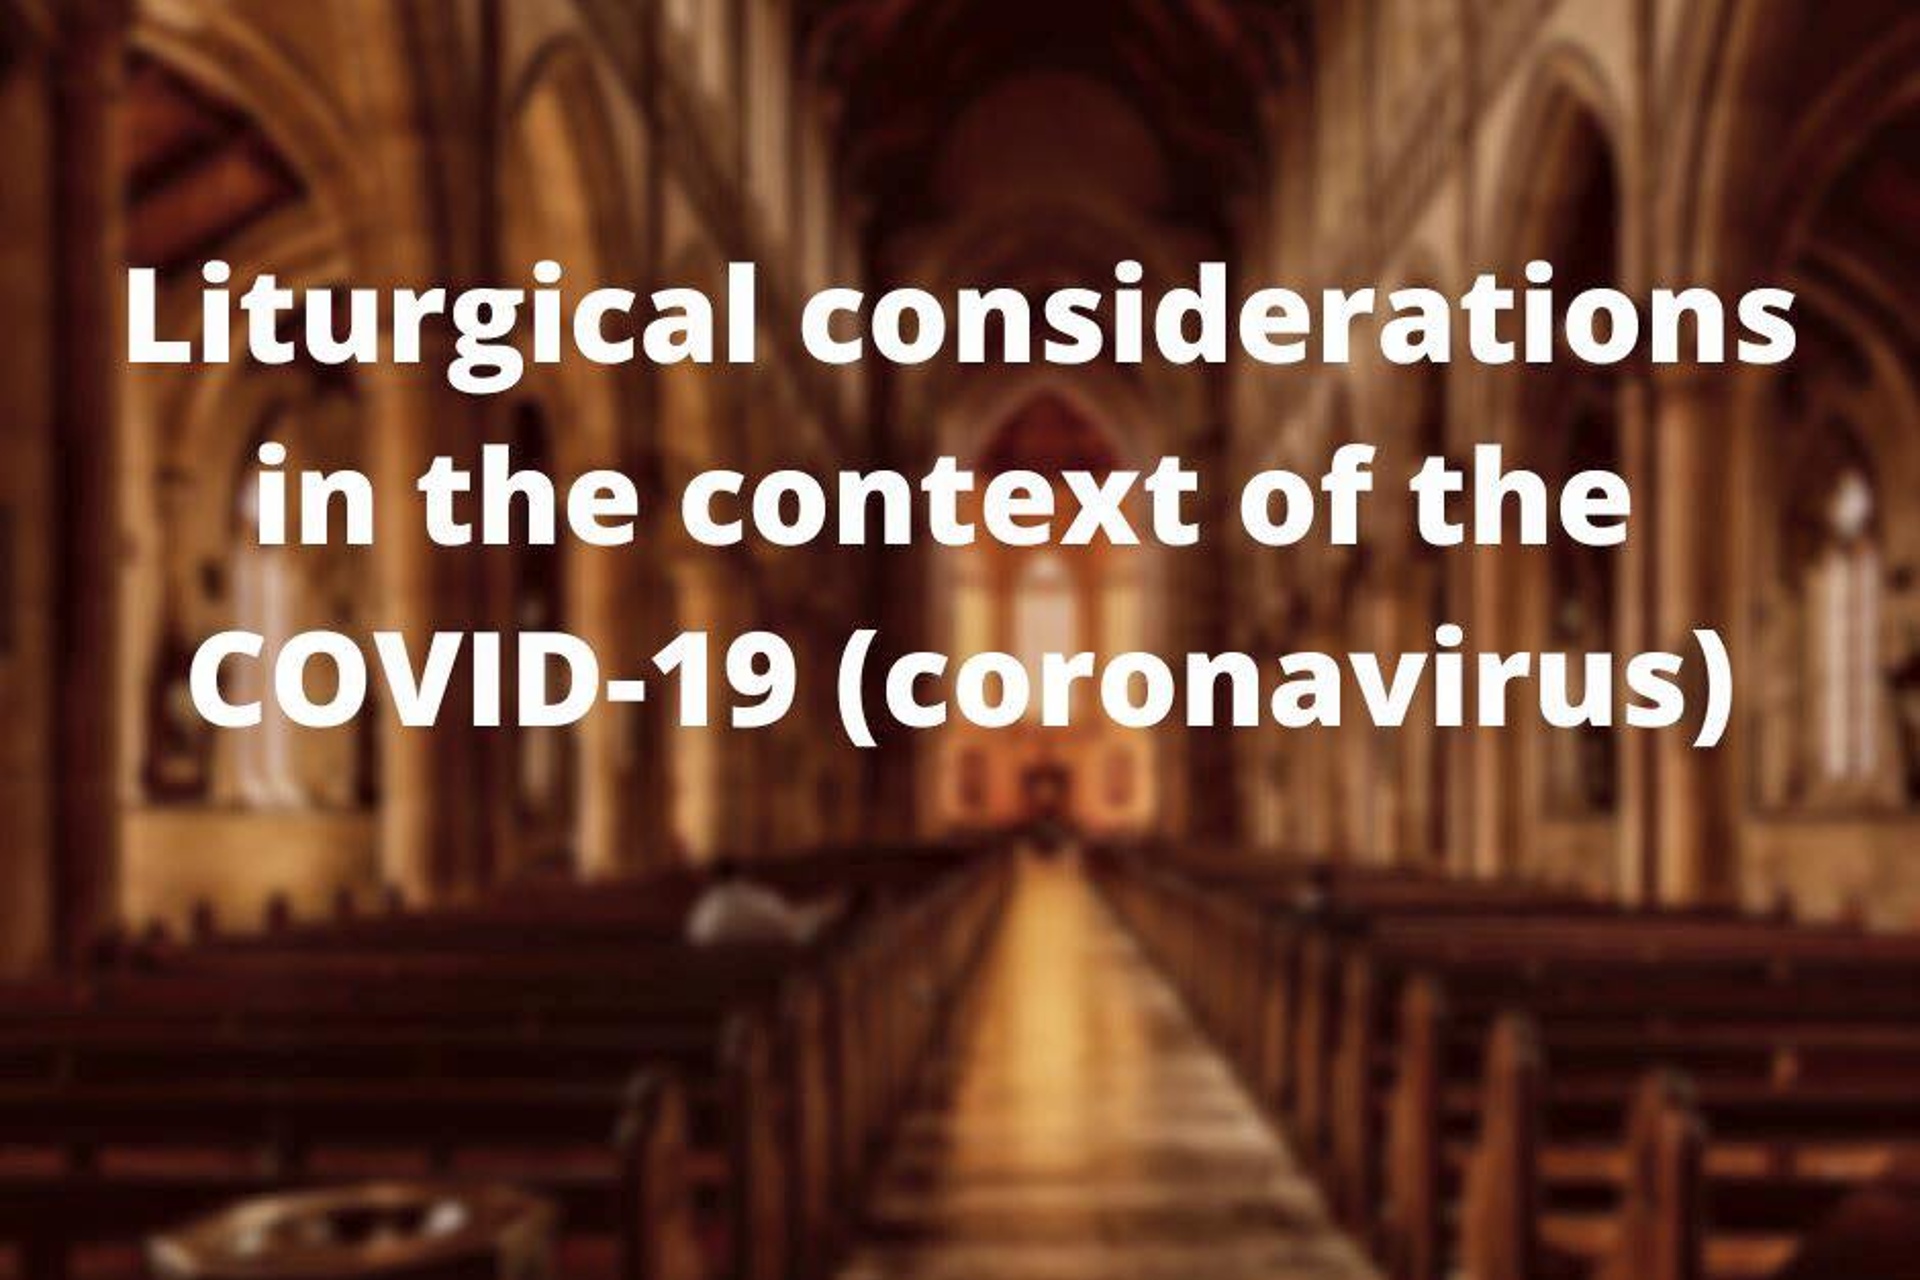 Irish Catholic Bishops' Conference statement on liturgical considerations in the context of COVID-19 (Coronavirus)